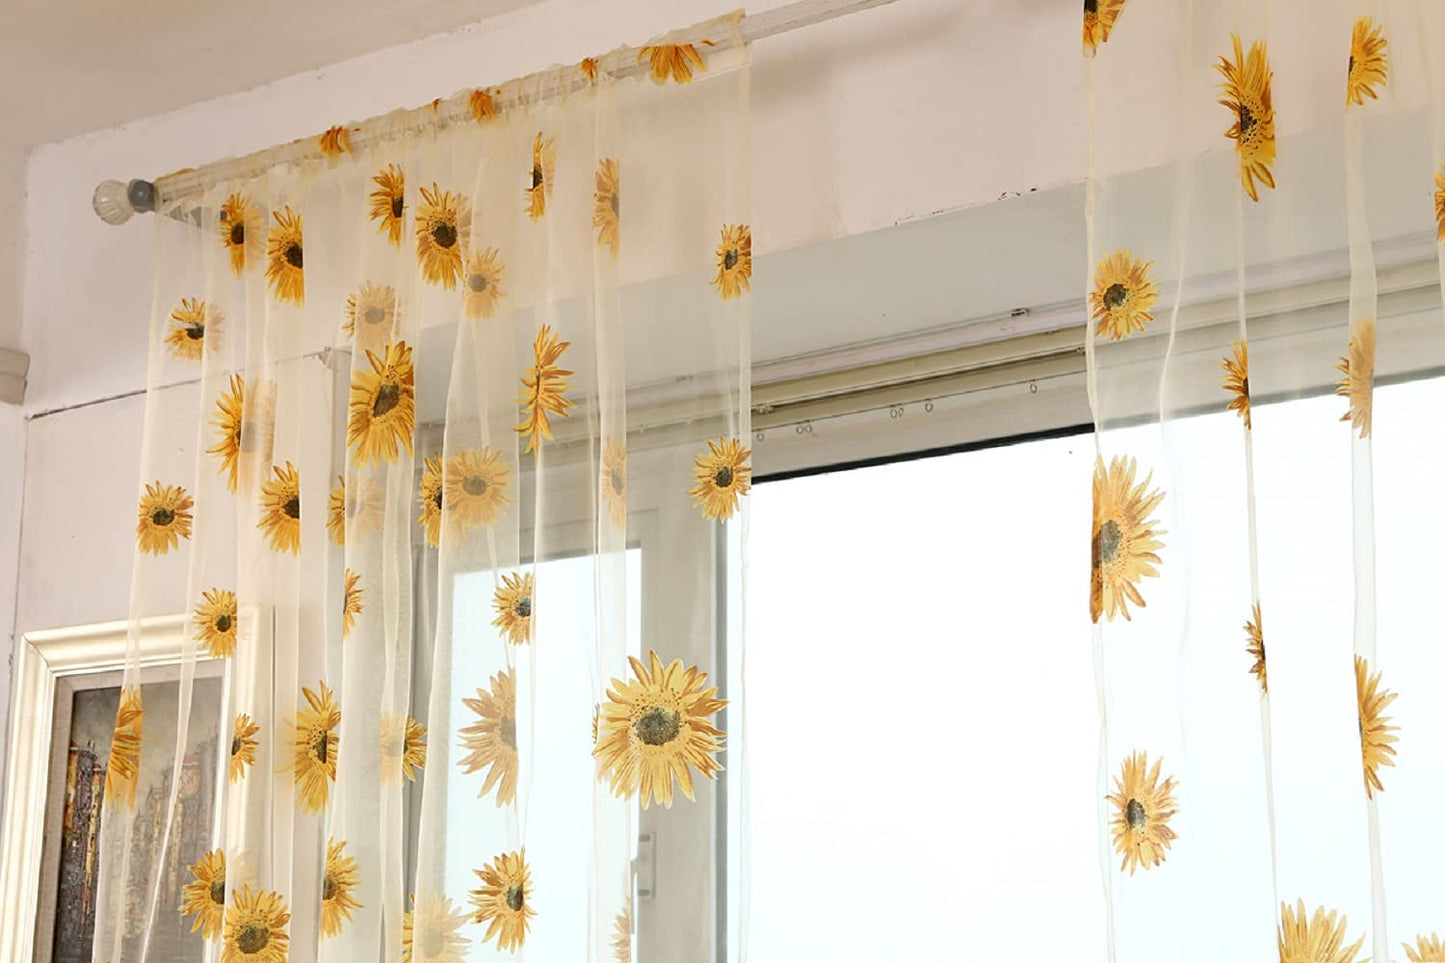 2PCS Sunflower Curtains Kitchen Decor Yellow Sheer Curtains for Small Window Voile Room Scarf Door Bed Drape Panels for Bedroom Living Room Floral Drape Panel (Yellow)  Wirhlly   